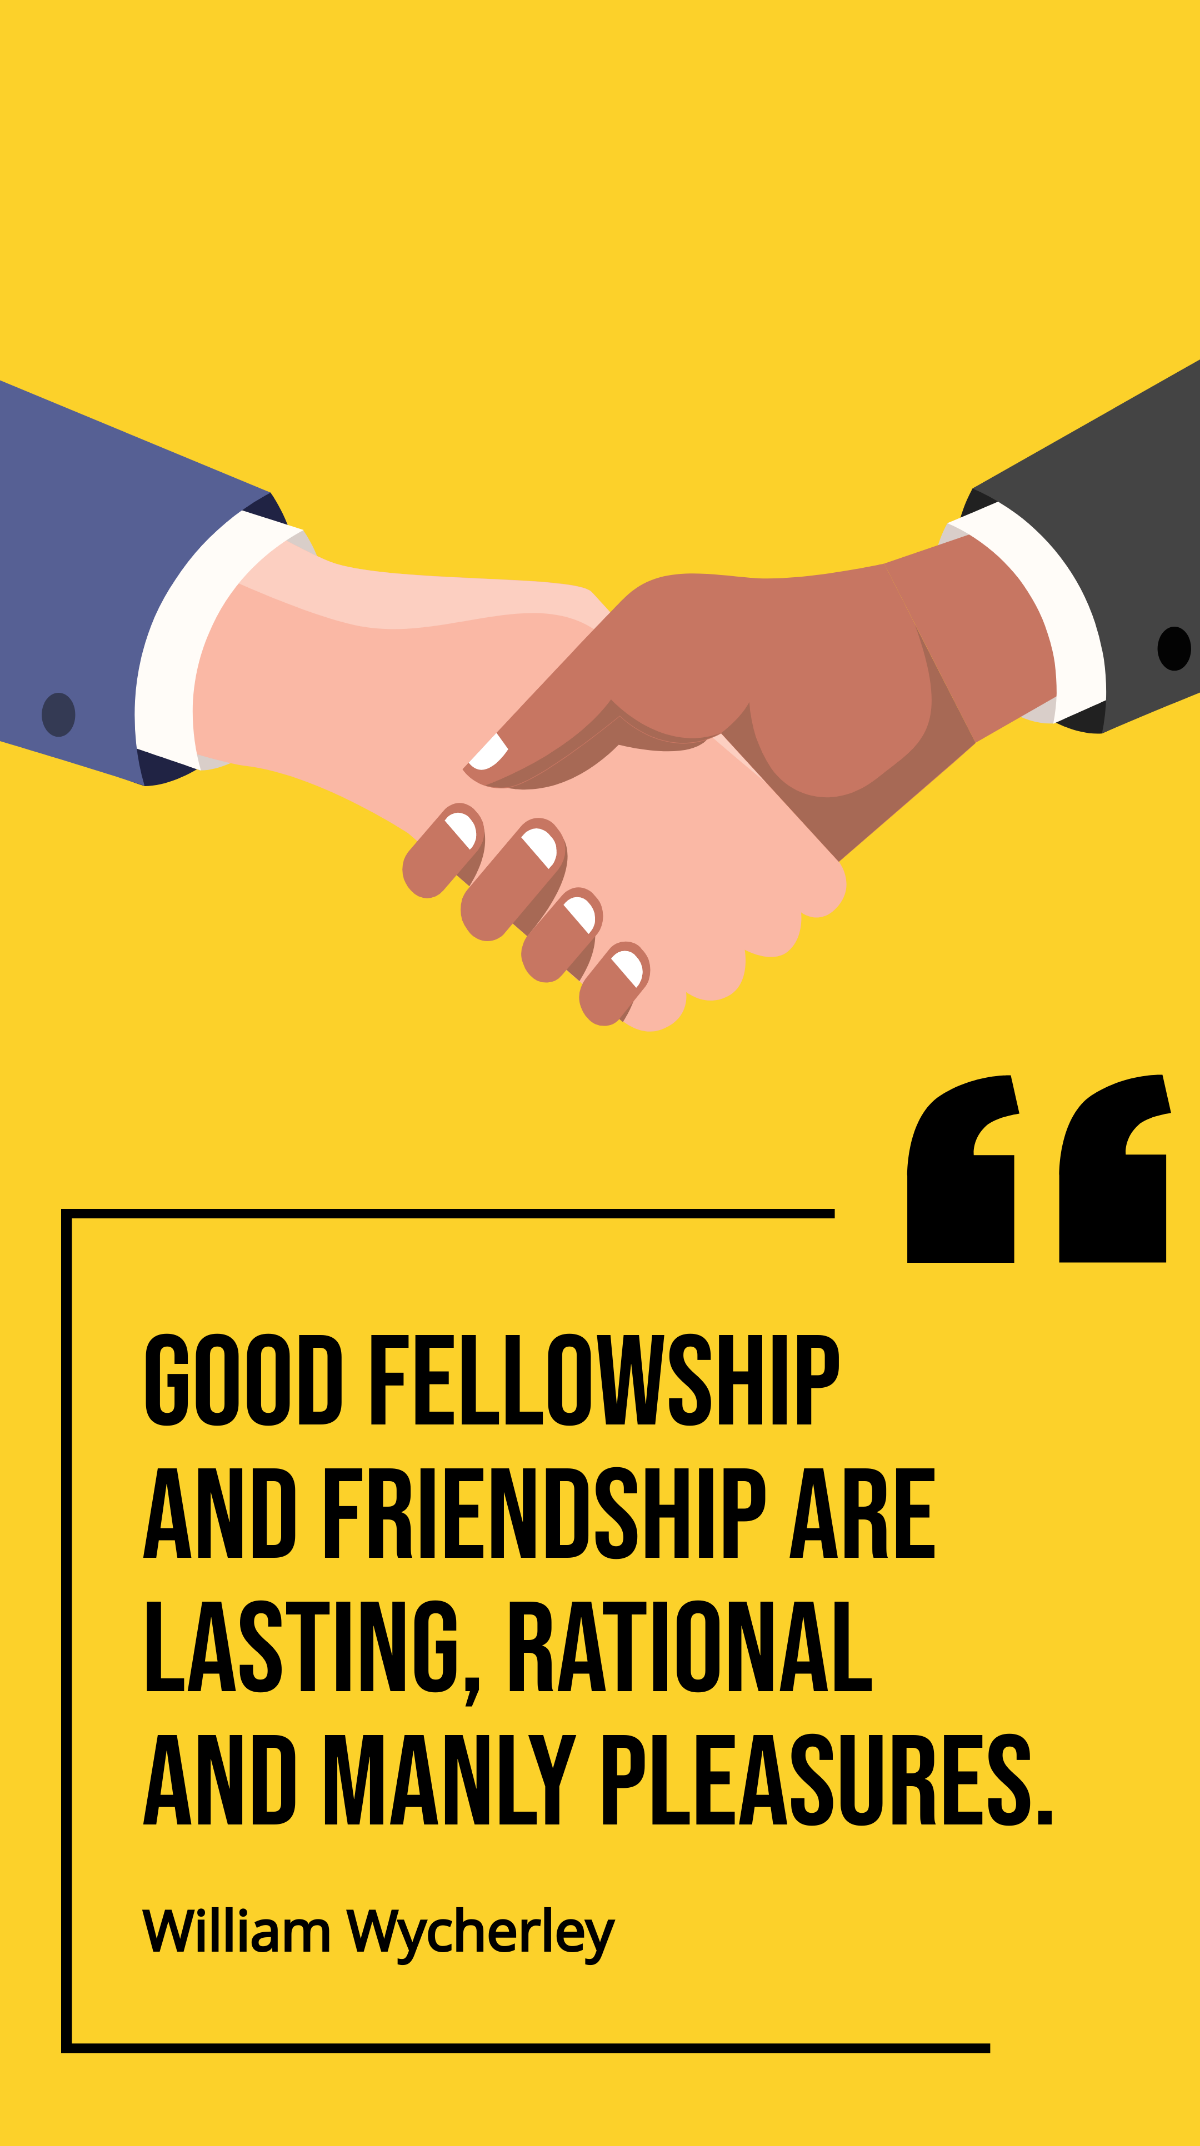 William Wycherley - Good fellowship and friendship are lasting, rational and manly pleasures. Template